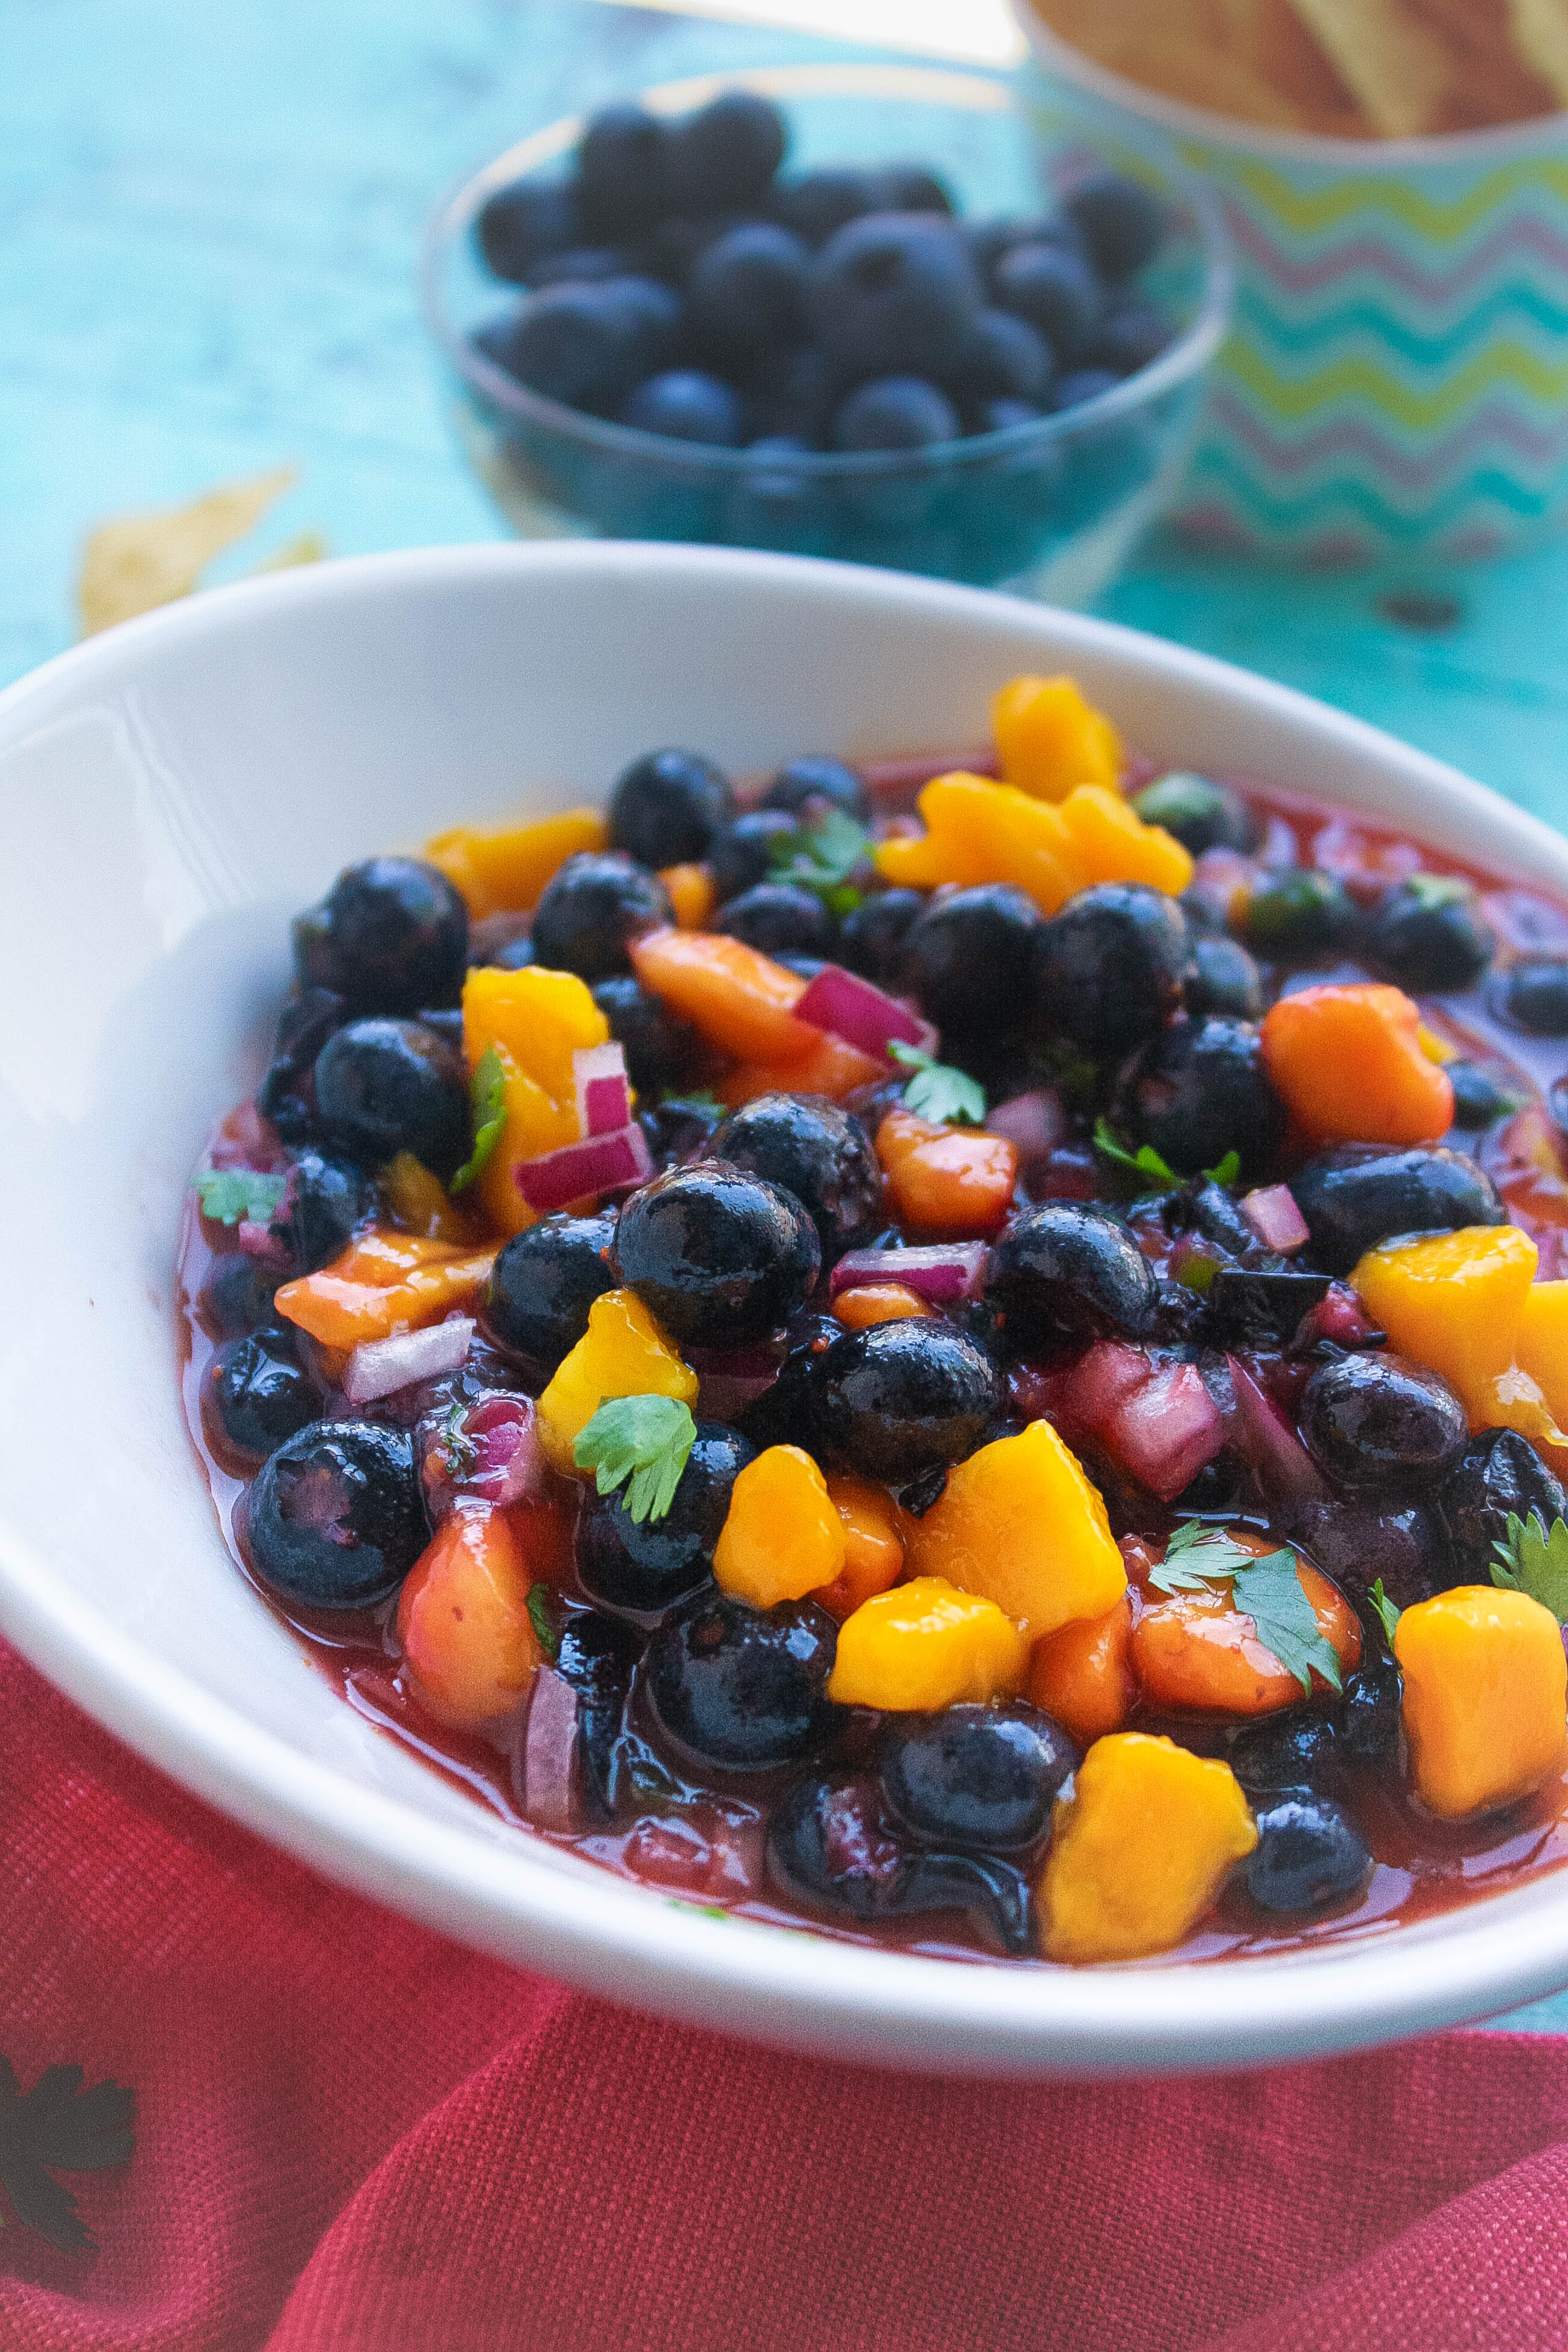 Blueberry-Mango Salsa is a great salsa for snacking on, especially this summer! Snack on Blueberry-Mango Salsa this season for a flavorful treat!